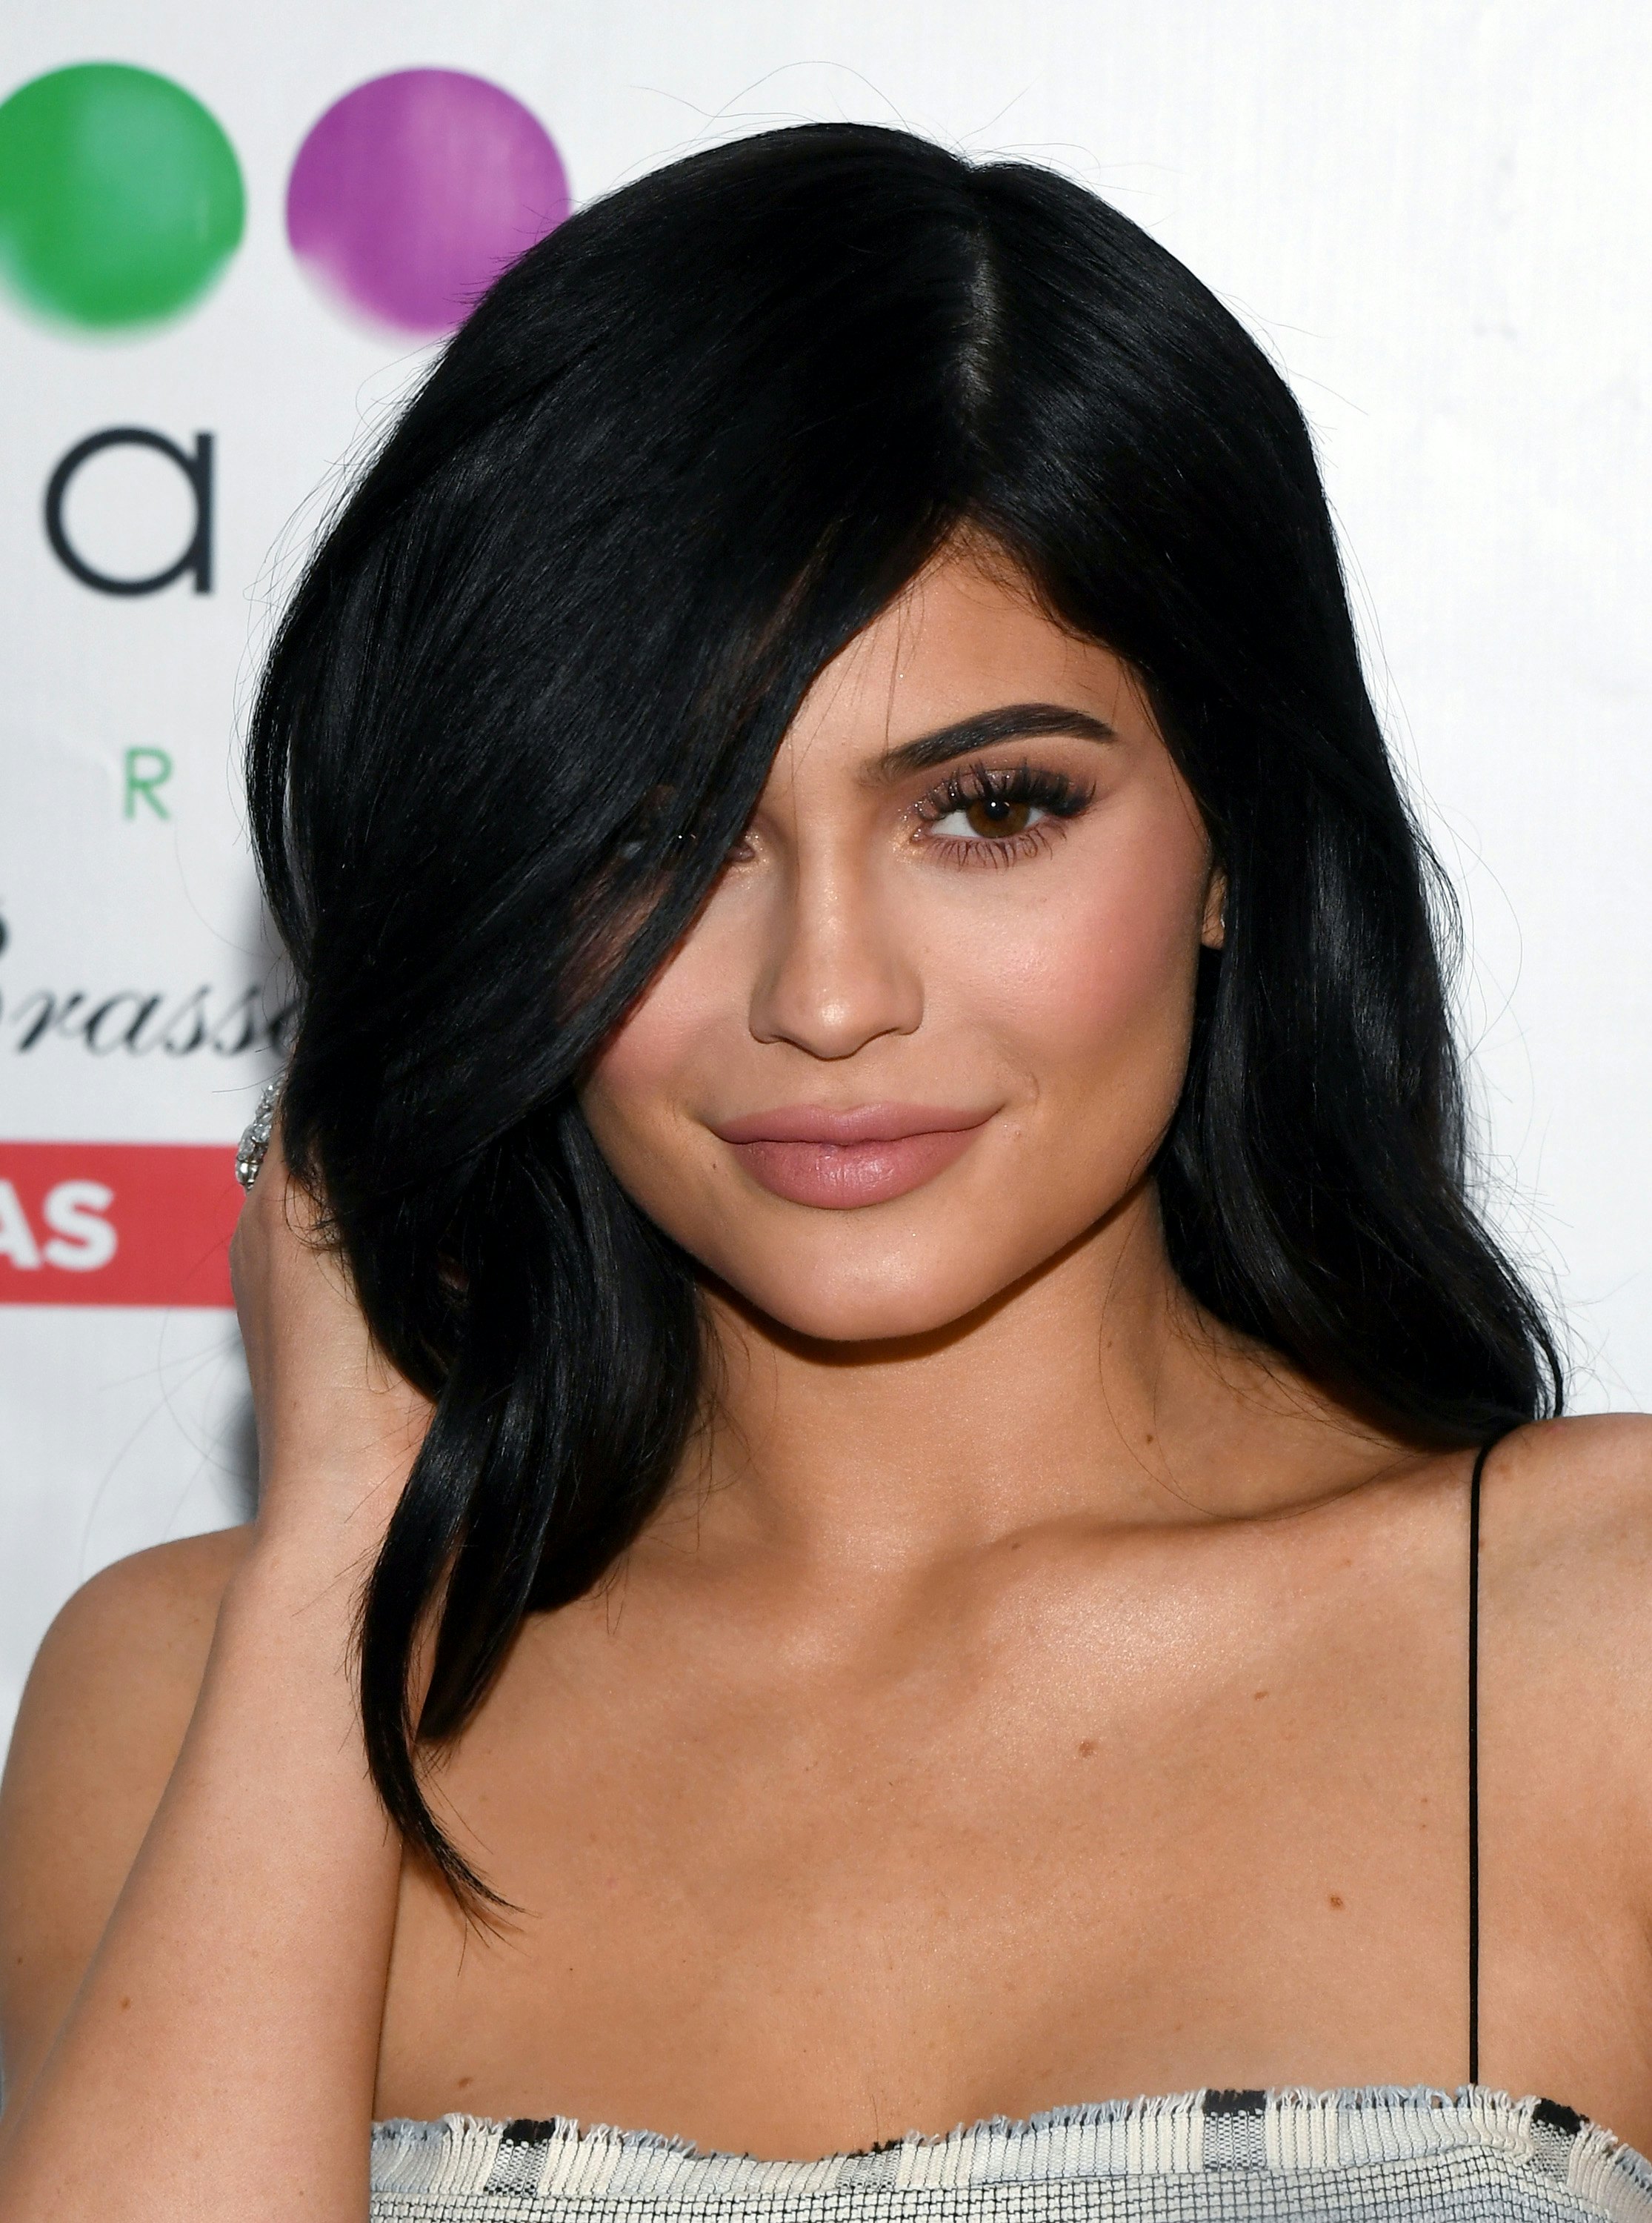 Watch Watch Kylie Jenner Do Her New “Classic Kylie” Glam